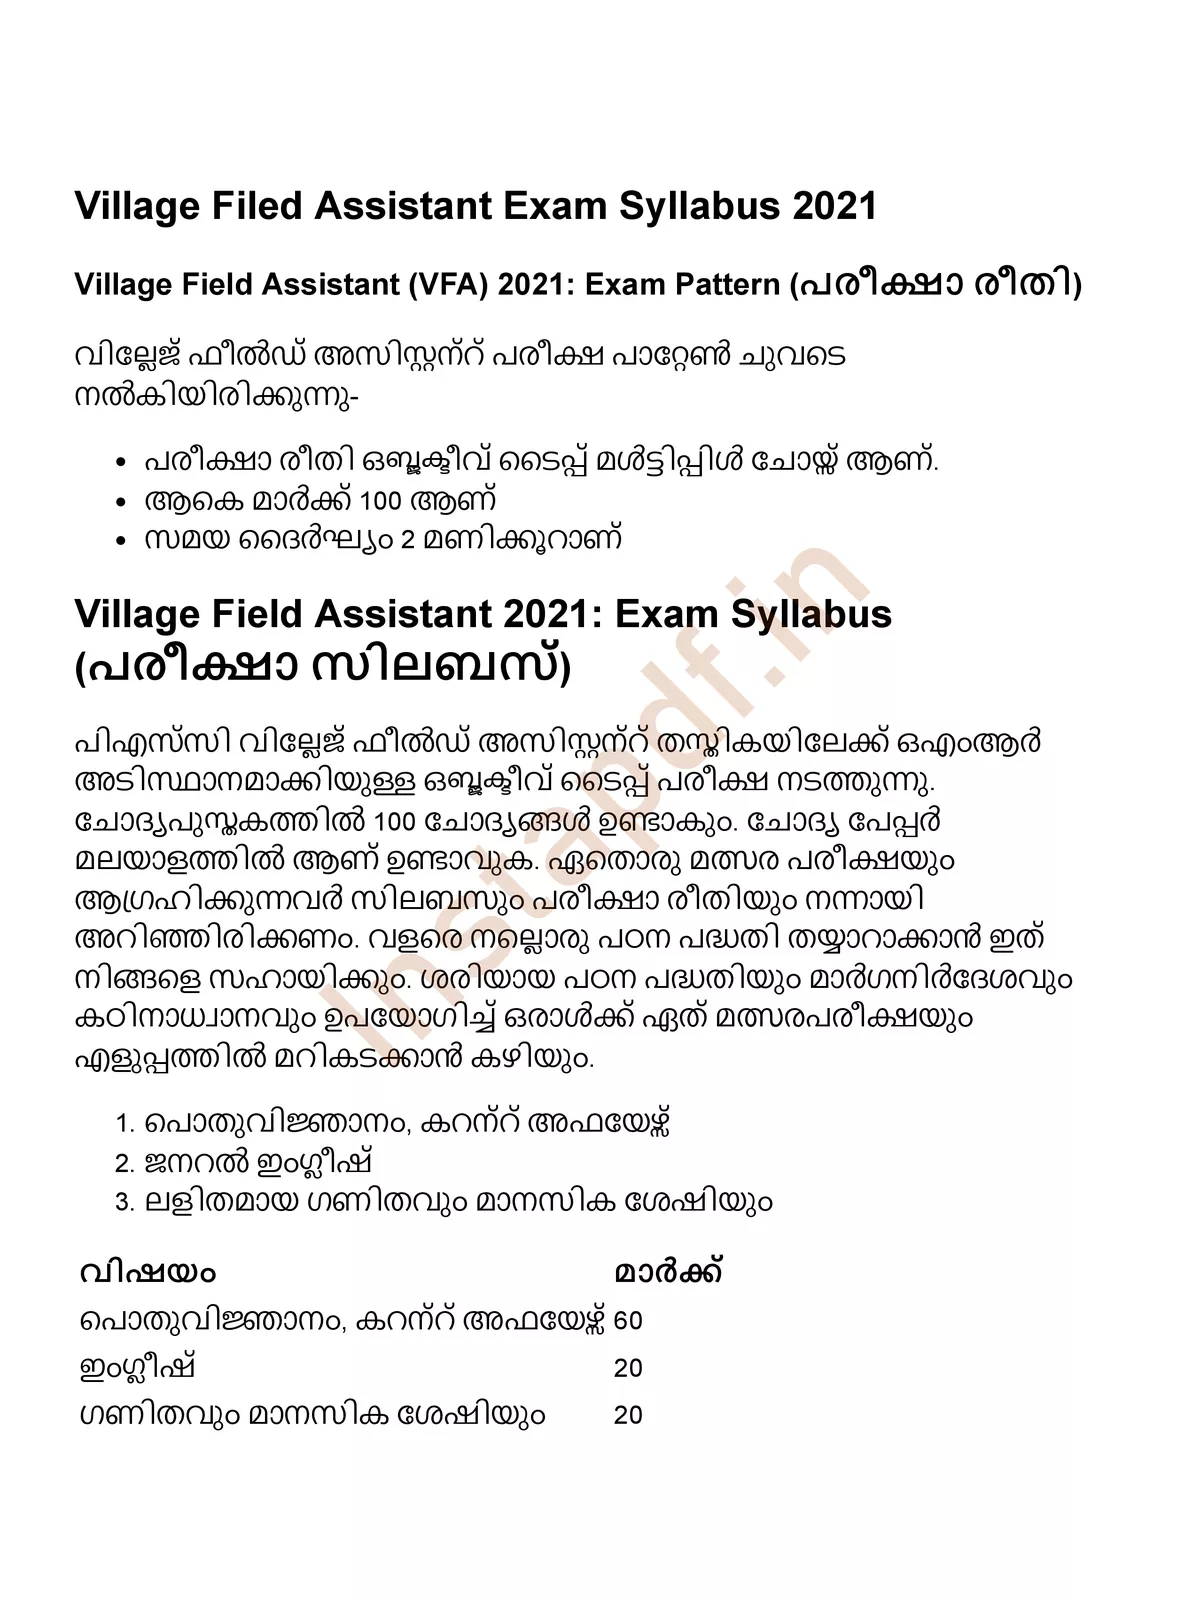 Village Filed Assistant Syllabus 2021